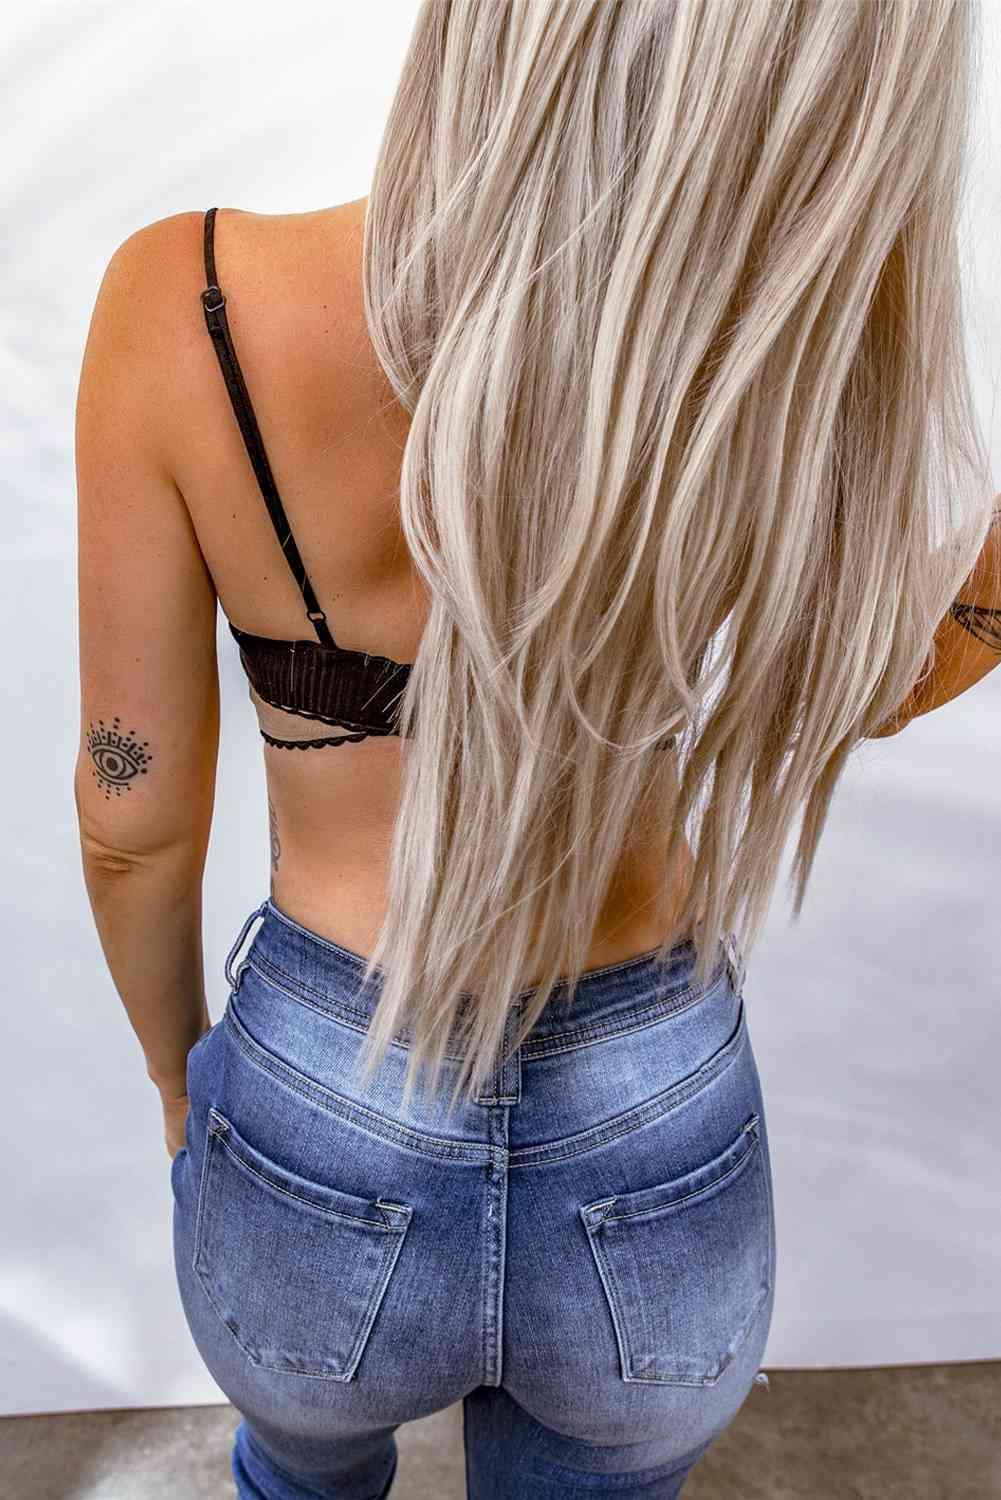 a woman with blonde hair wearing jeans and a bra